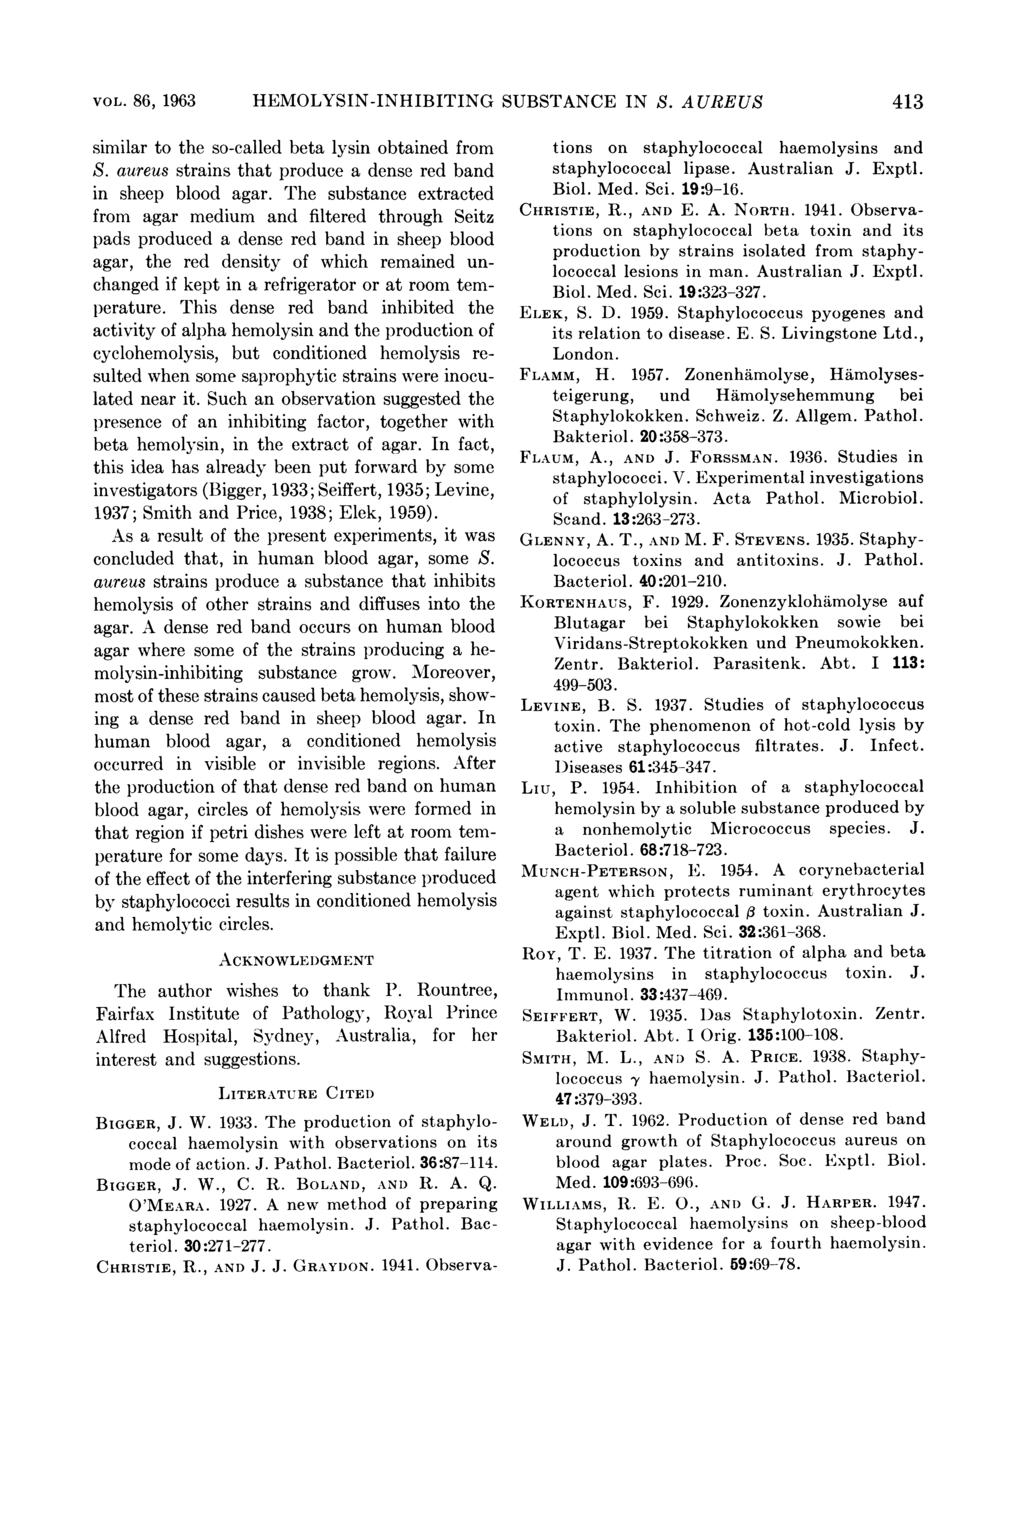 VOL. 86, 1963 HEMOLYSIN-INHIBITING SUBSTANCE IN S. AUREUS 413 similar to the so-called beta lysin obtained from S. aureus strains that produce a dense red band in sheep blood agar.